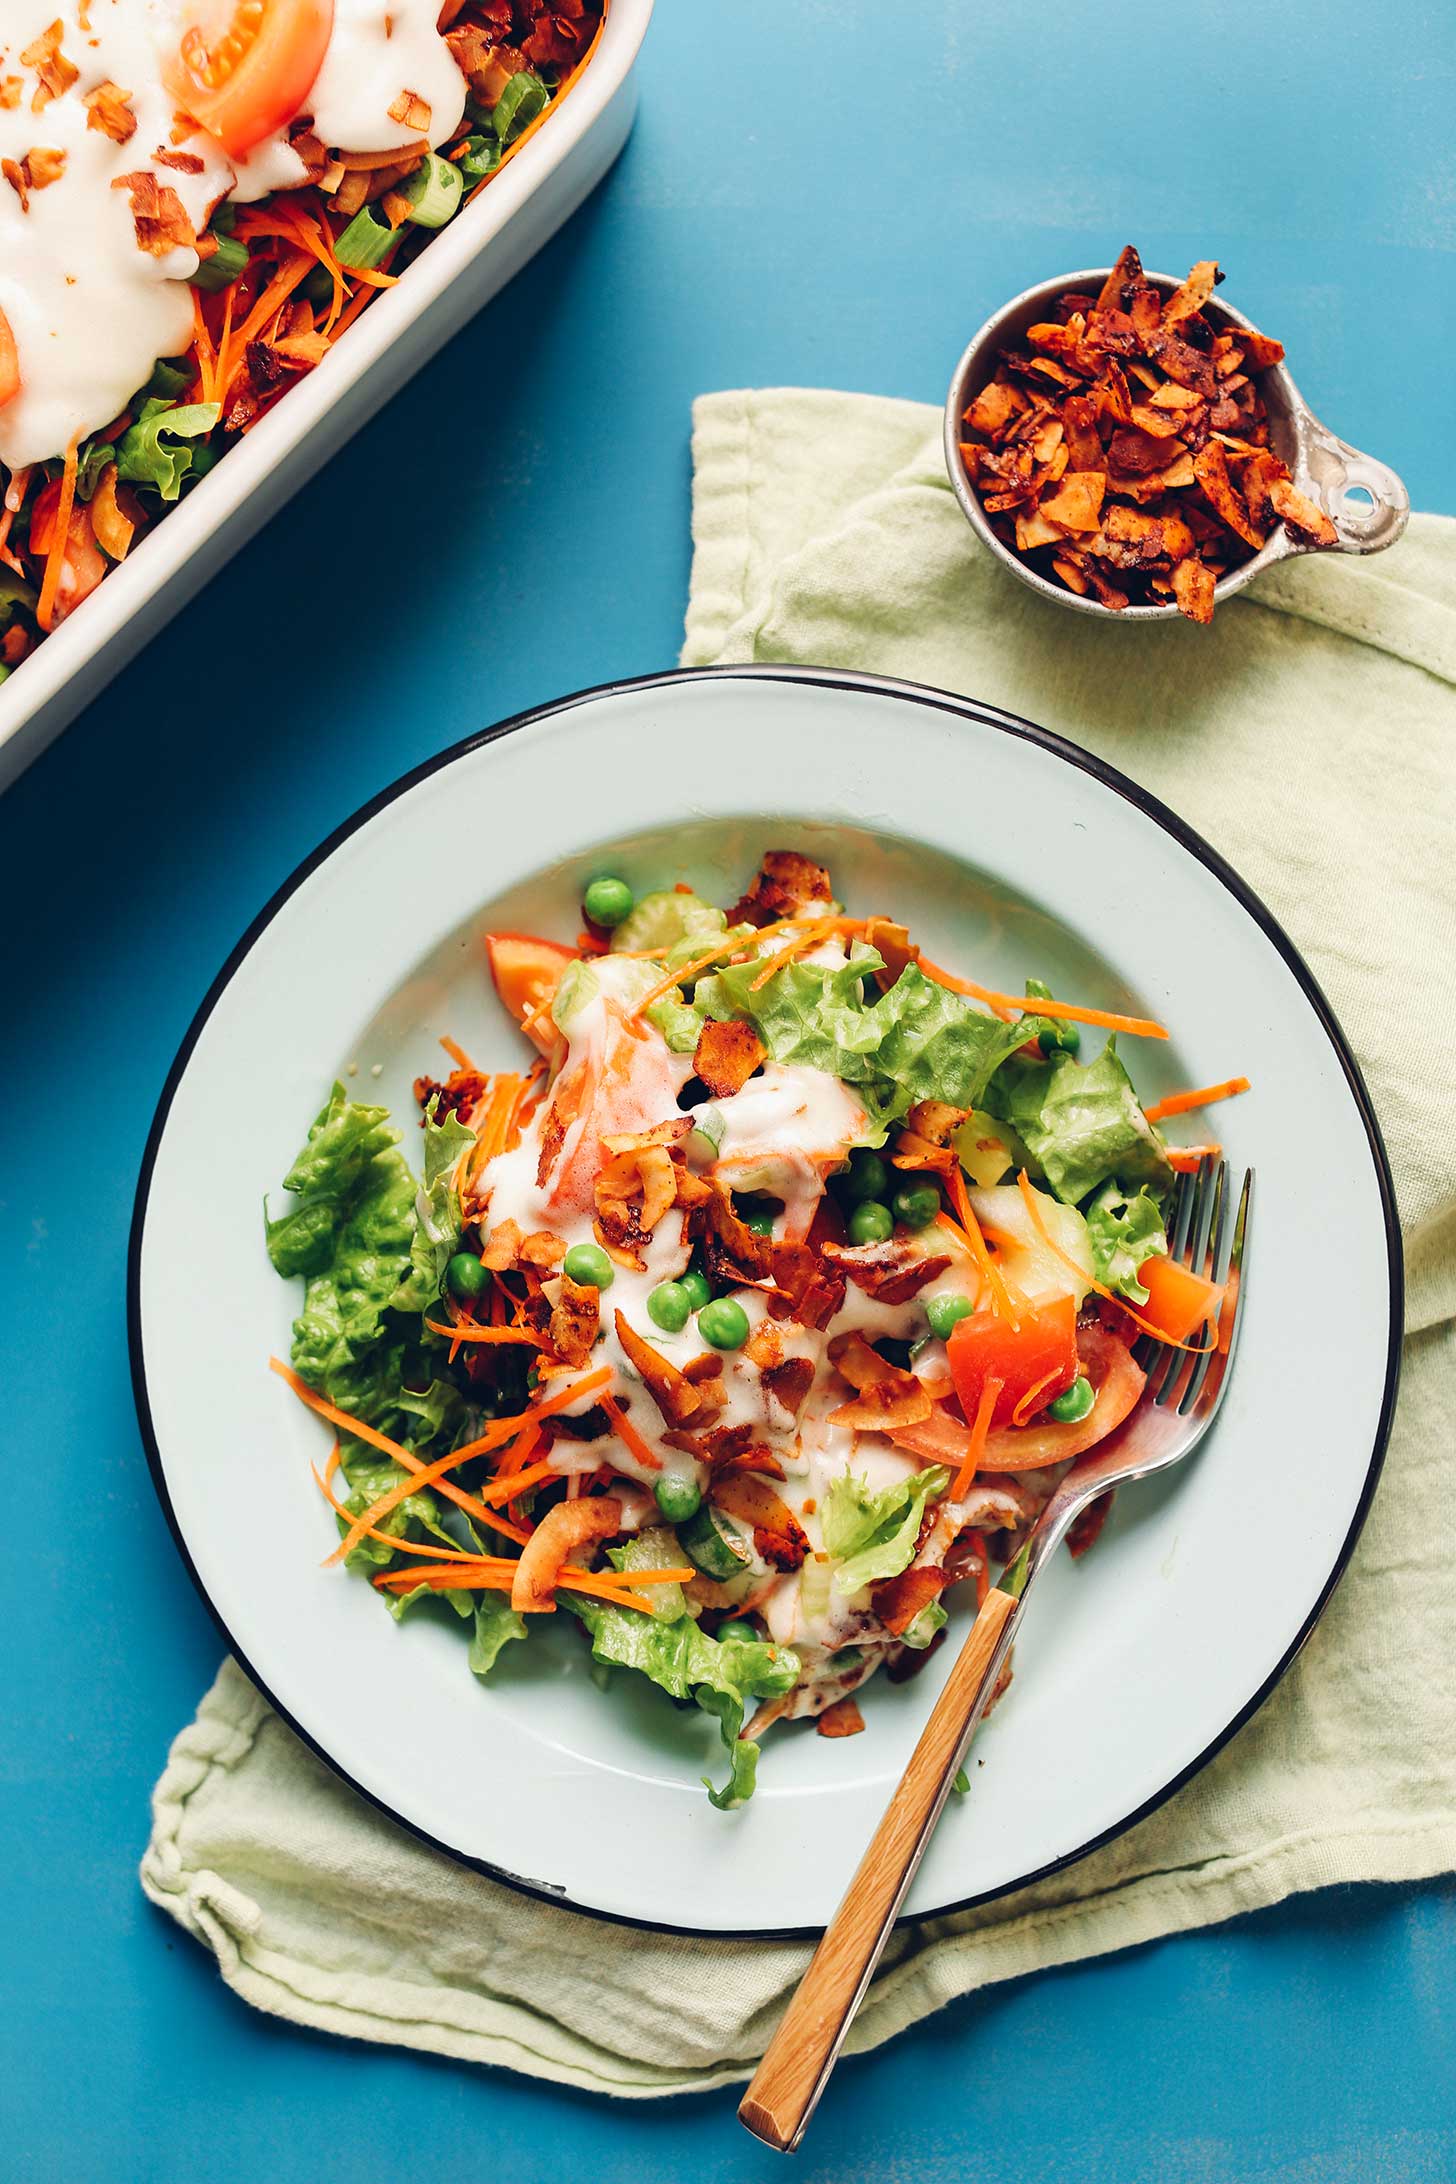 Big serving of gluten-free Vegan 7-Layer Salad for a healthy plant-based meal